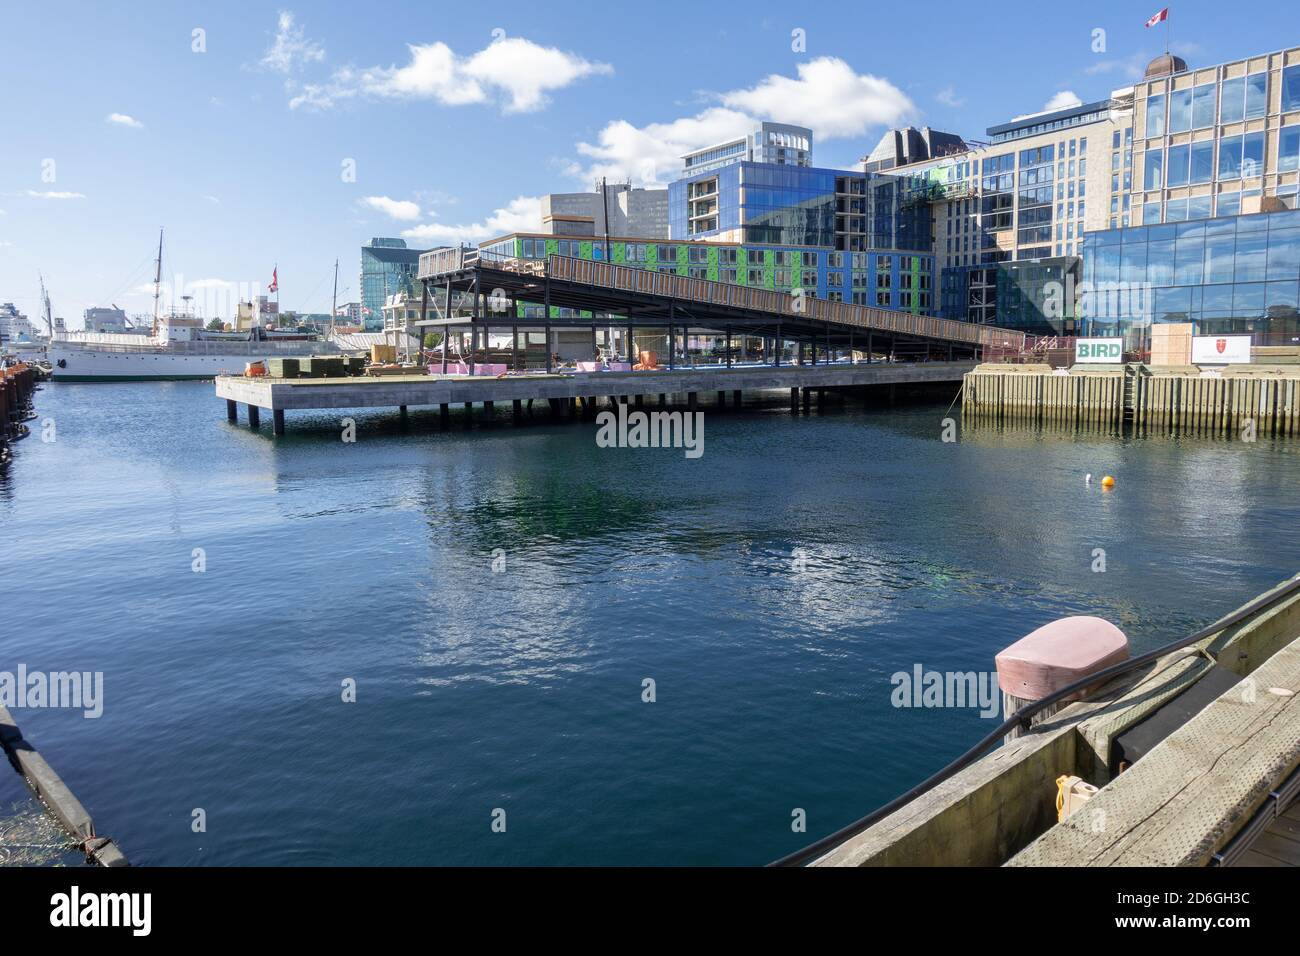 Construction Under Way Of The Queen’s Marque Residential Building On Halifax’s Waterfront Halifax Nova Scotia Canada September 5, 2019. Stock Photo